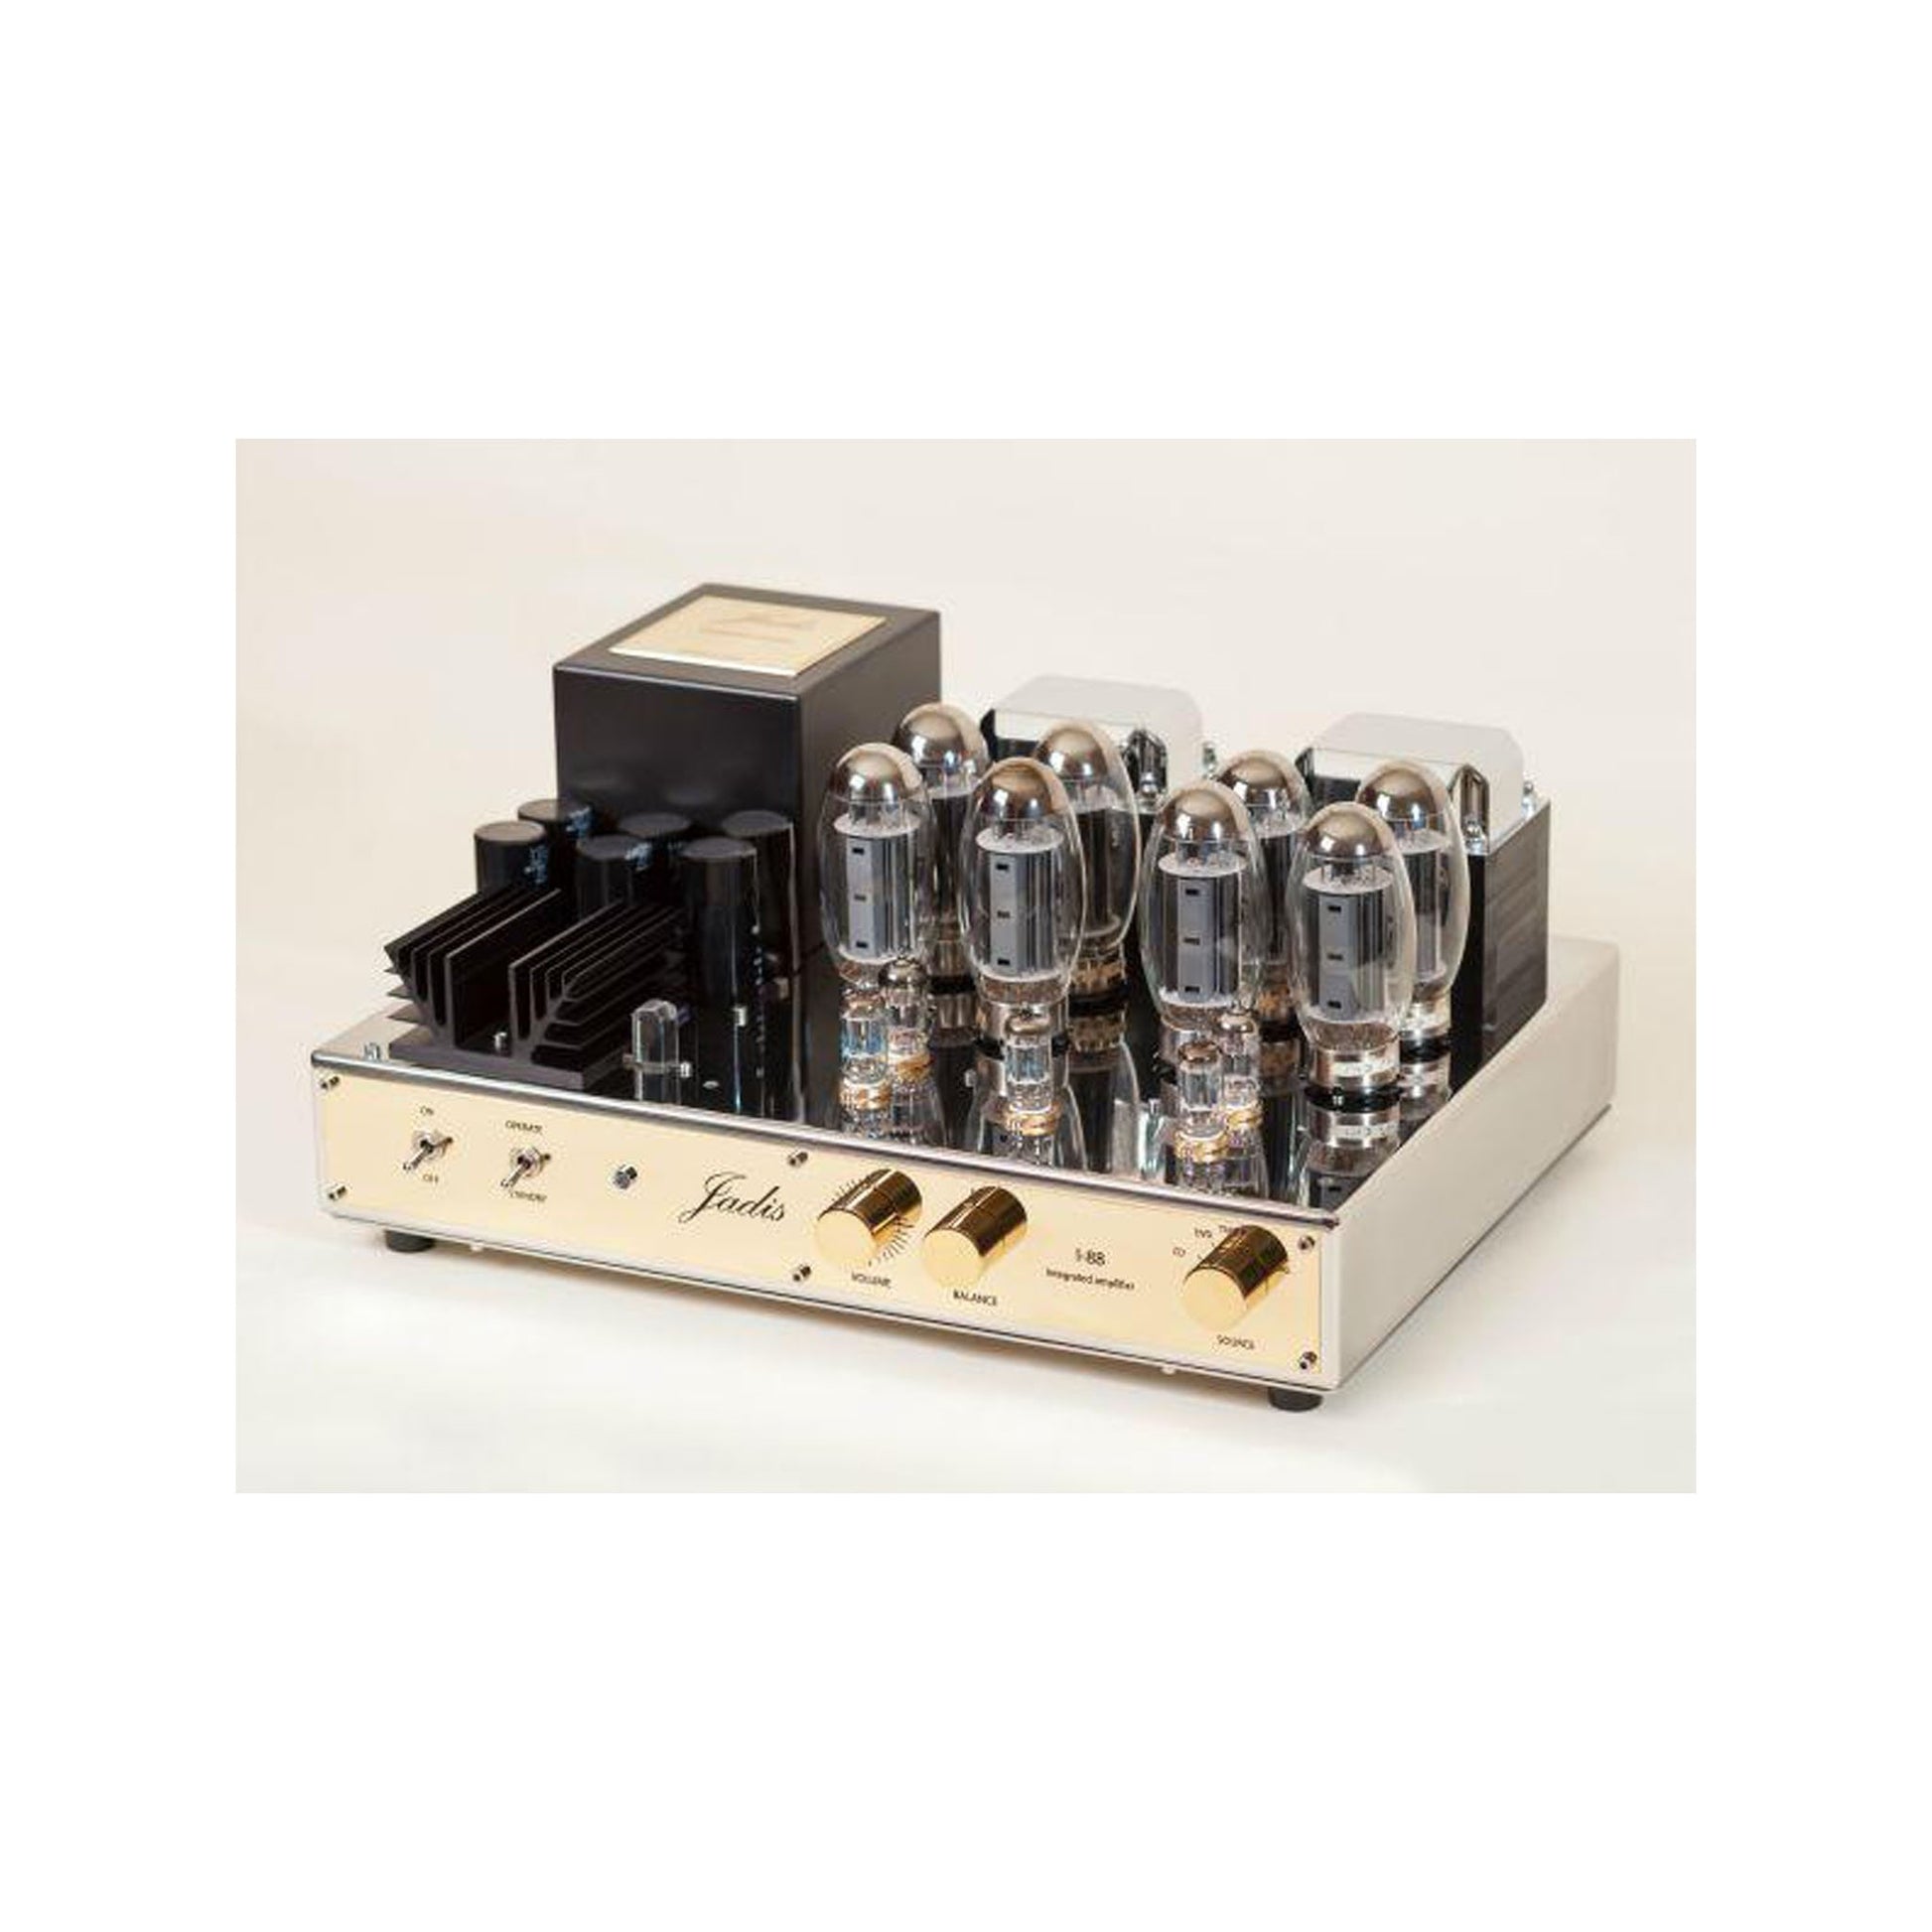 188 Integrated Tube Amp with Remote and USB - Trimira